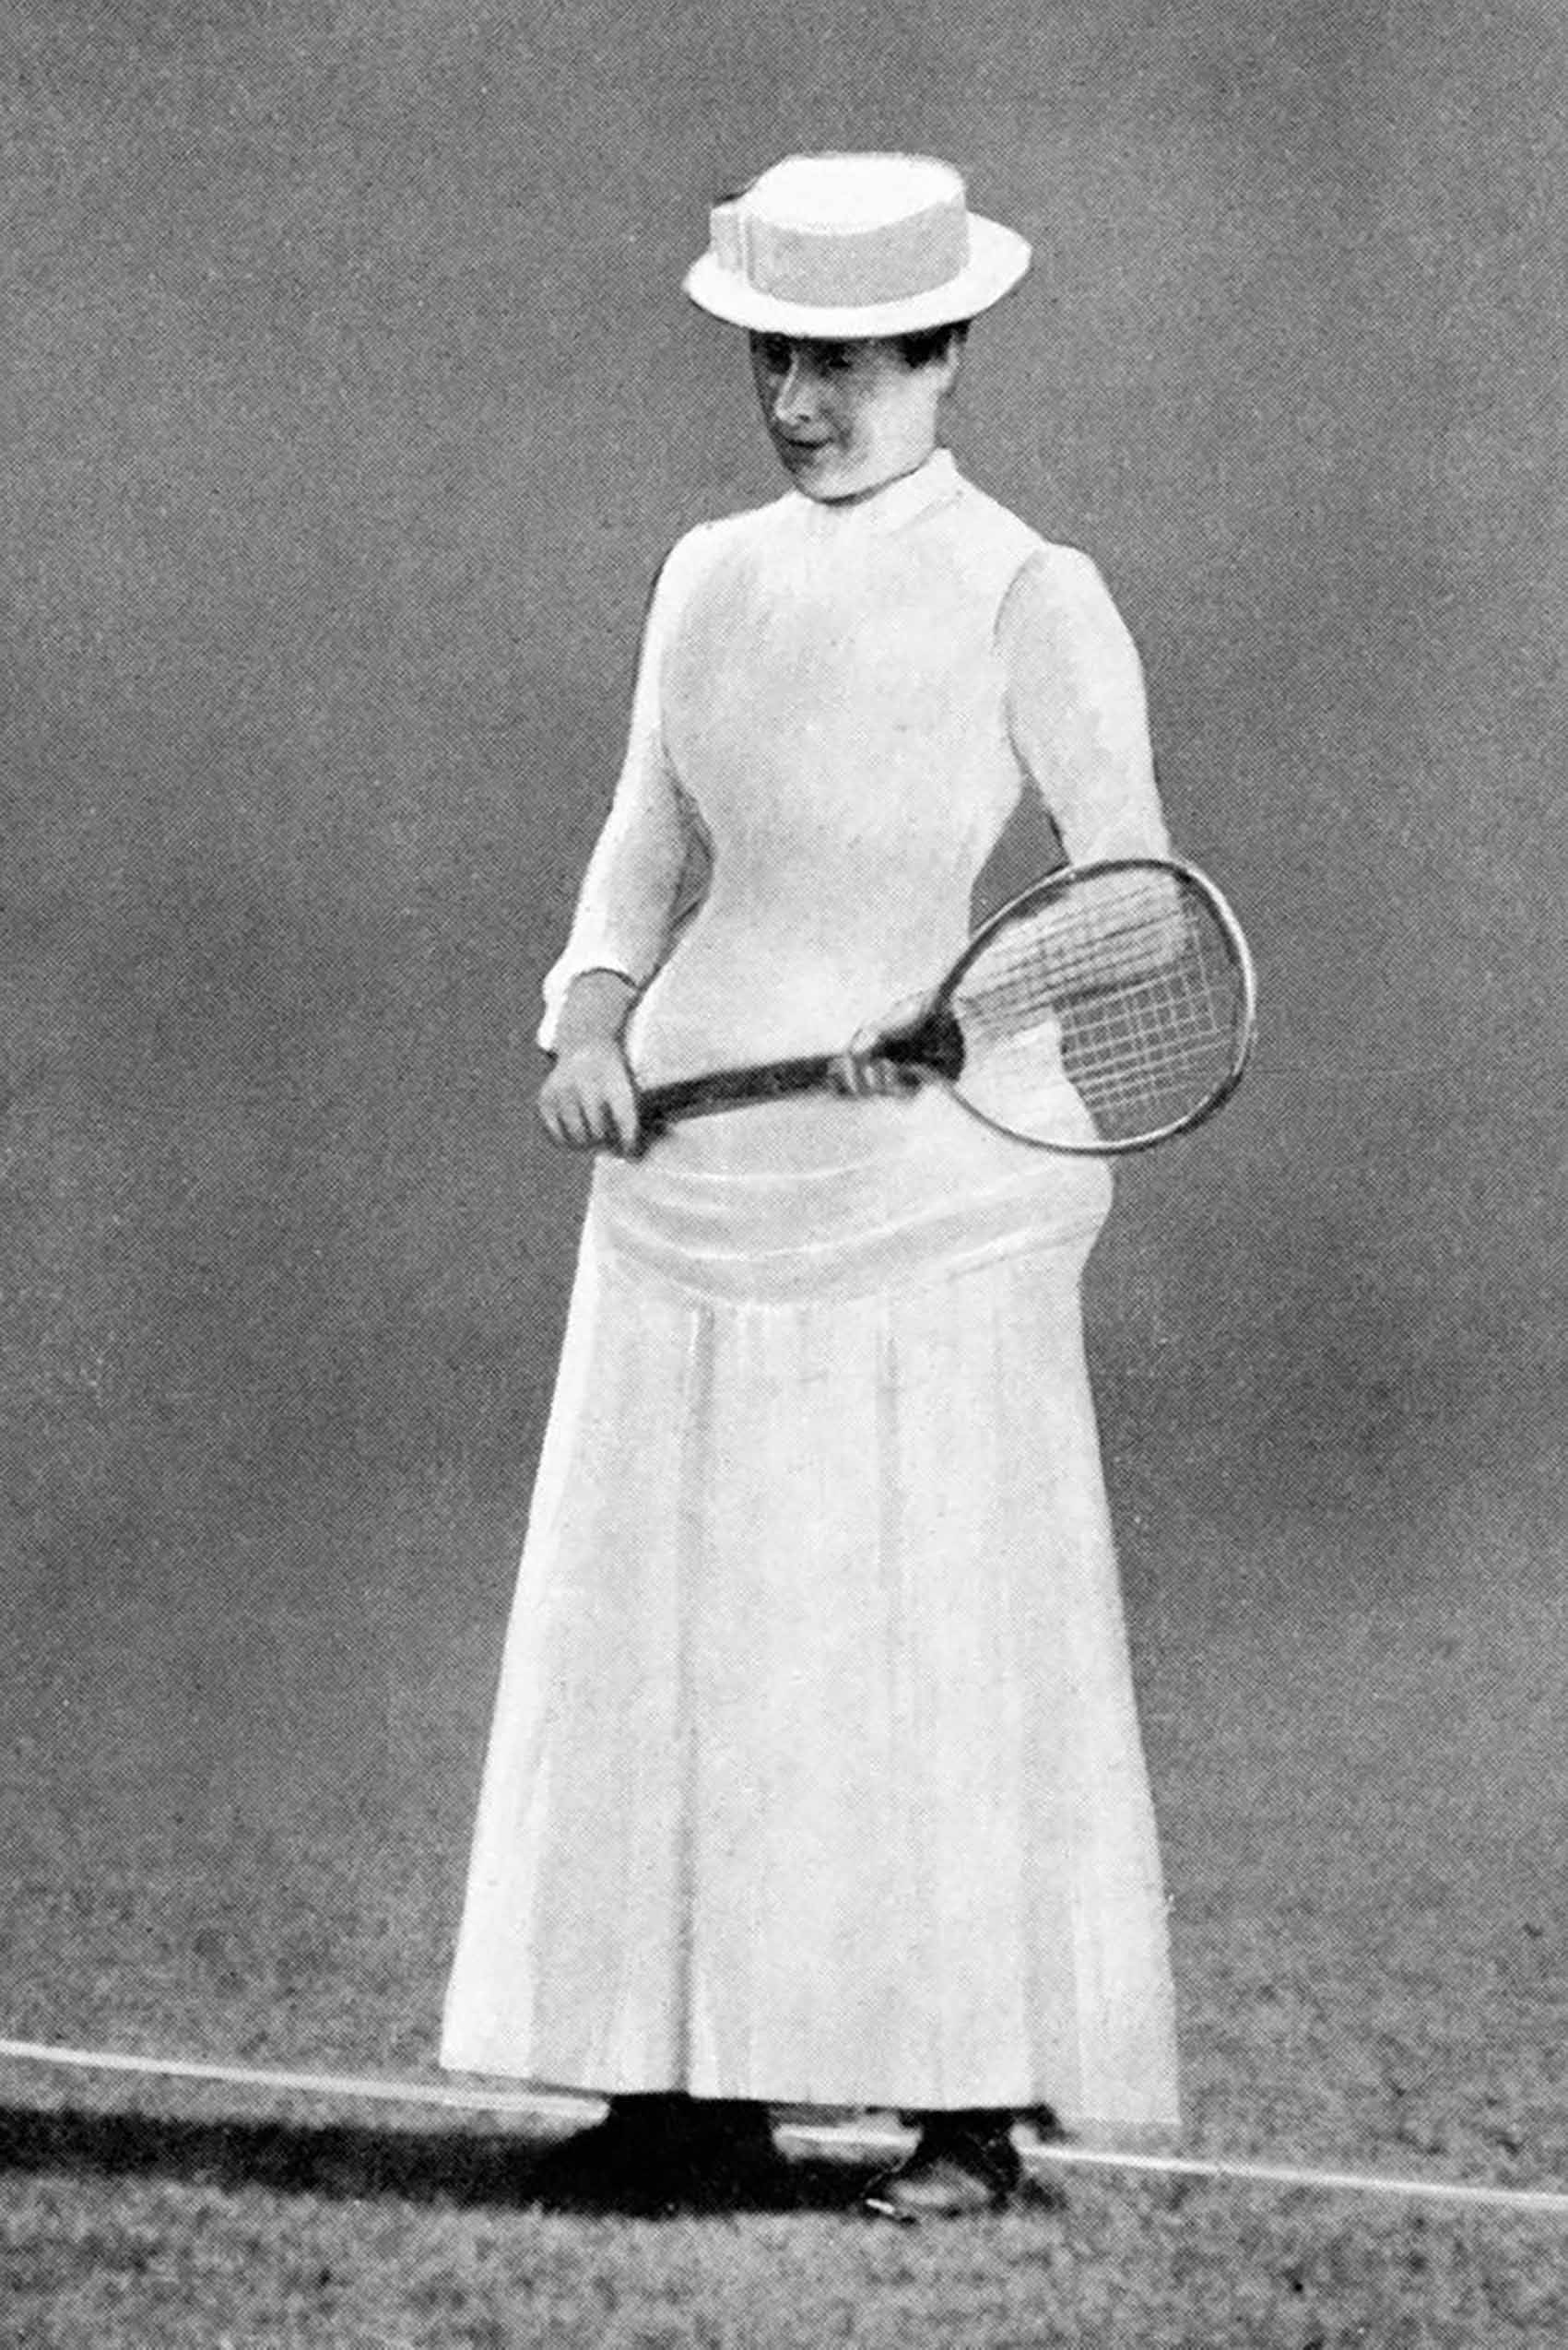 From Corsets And Petticoats To Lycra And Nike, This Is A Brief History Of Wimbledon Fashion. צילום: פינטרסט-1